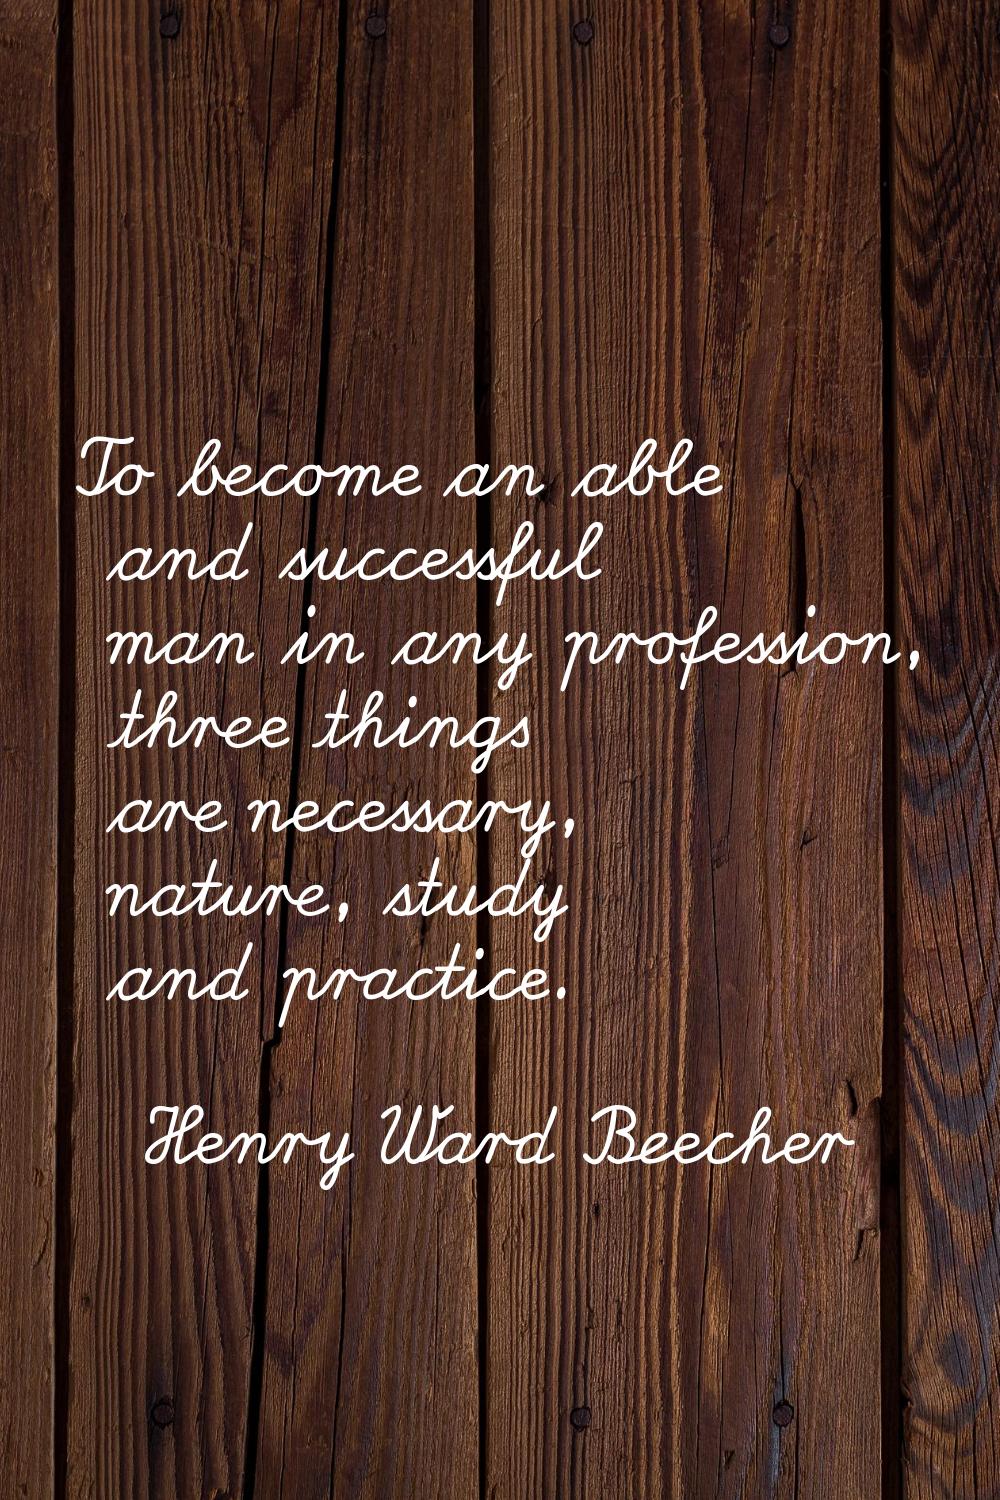 To become an able and successful man in any profession, three things are necessary, nature, study a